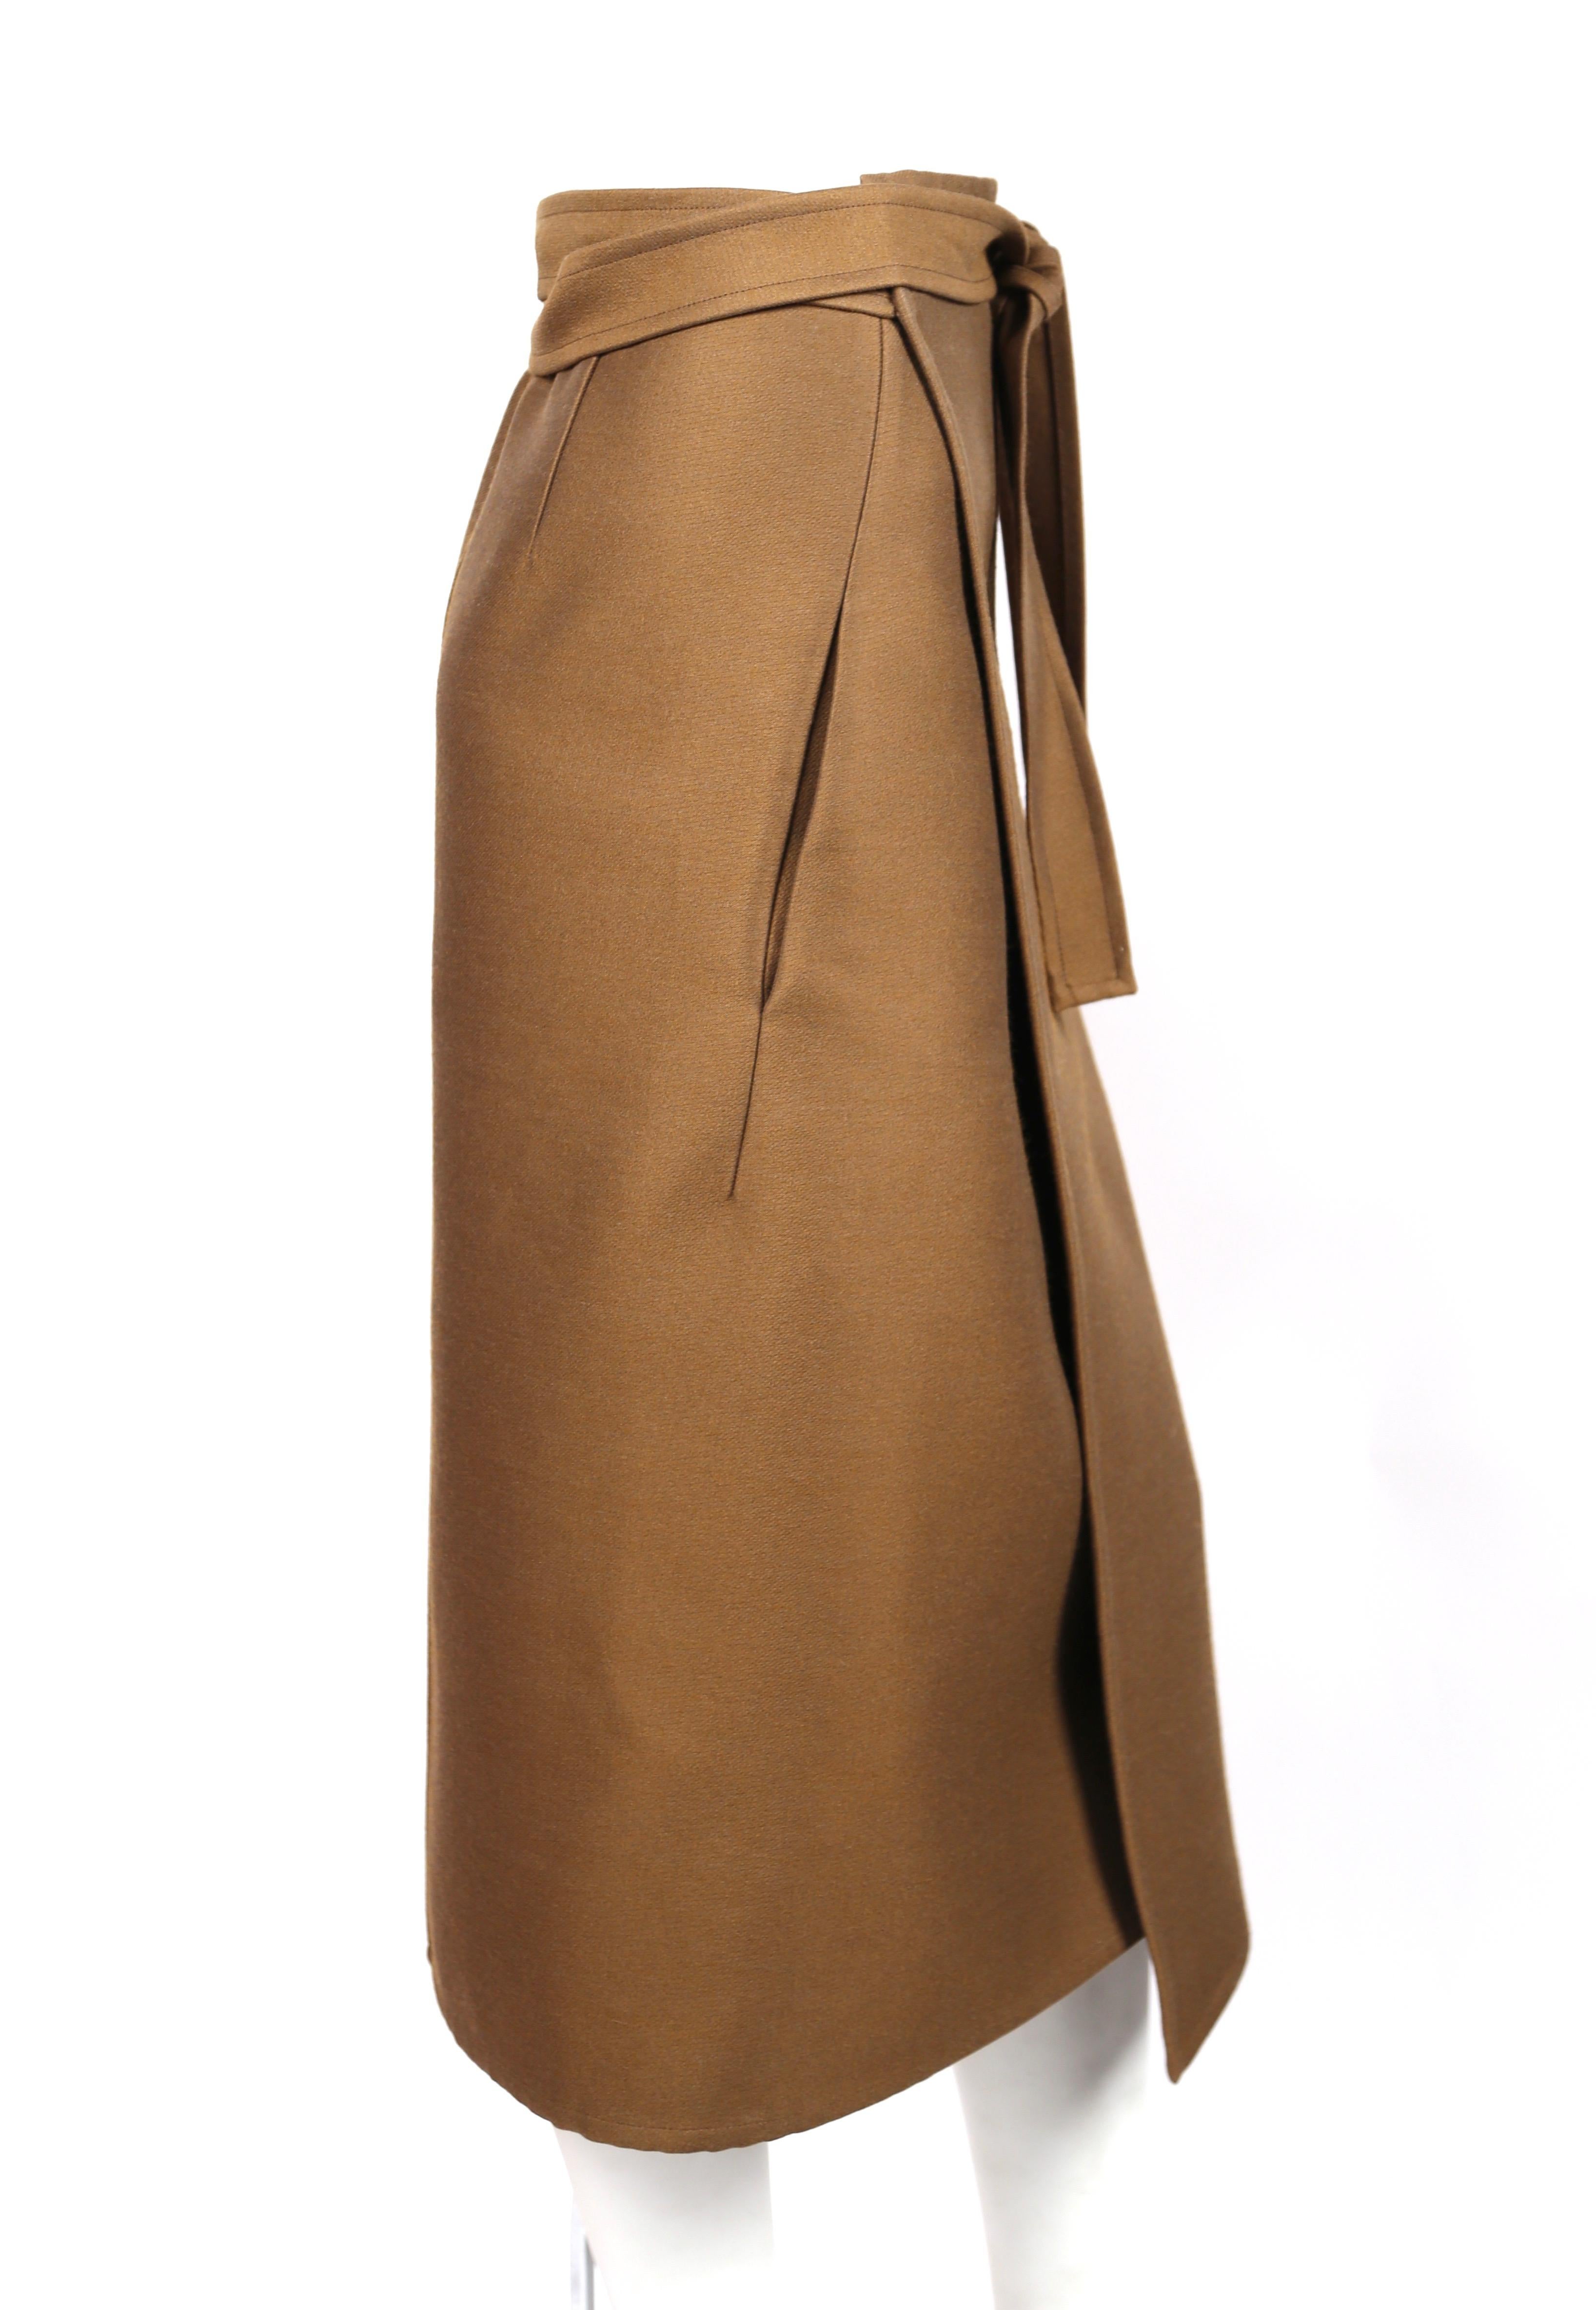 Tan, wool wrap skirt designed by Phoebe Philo for Celine. French size 38. Approximate measurements: 30